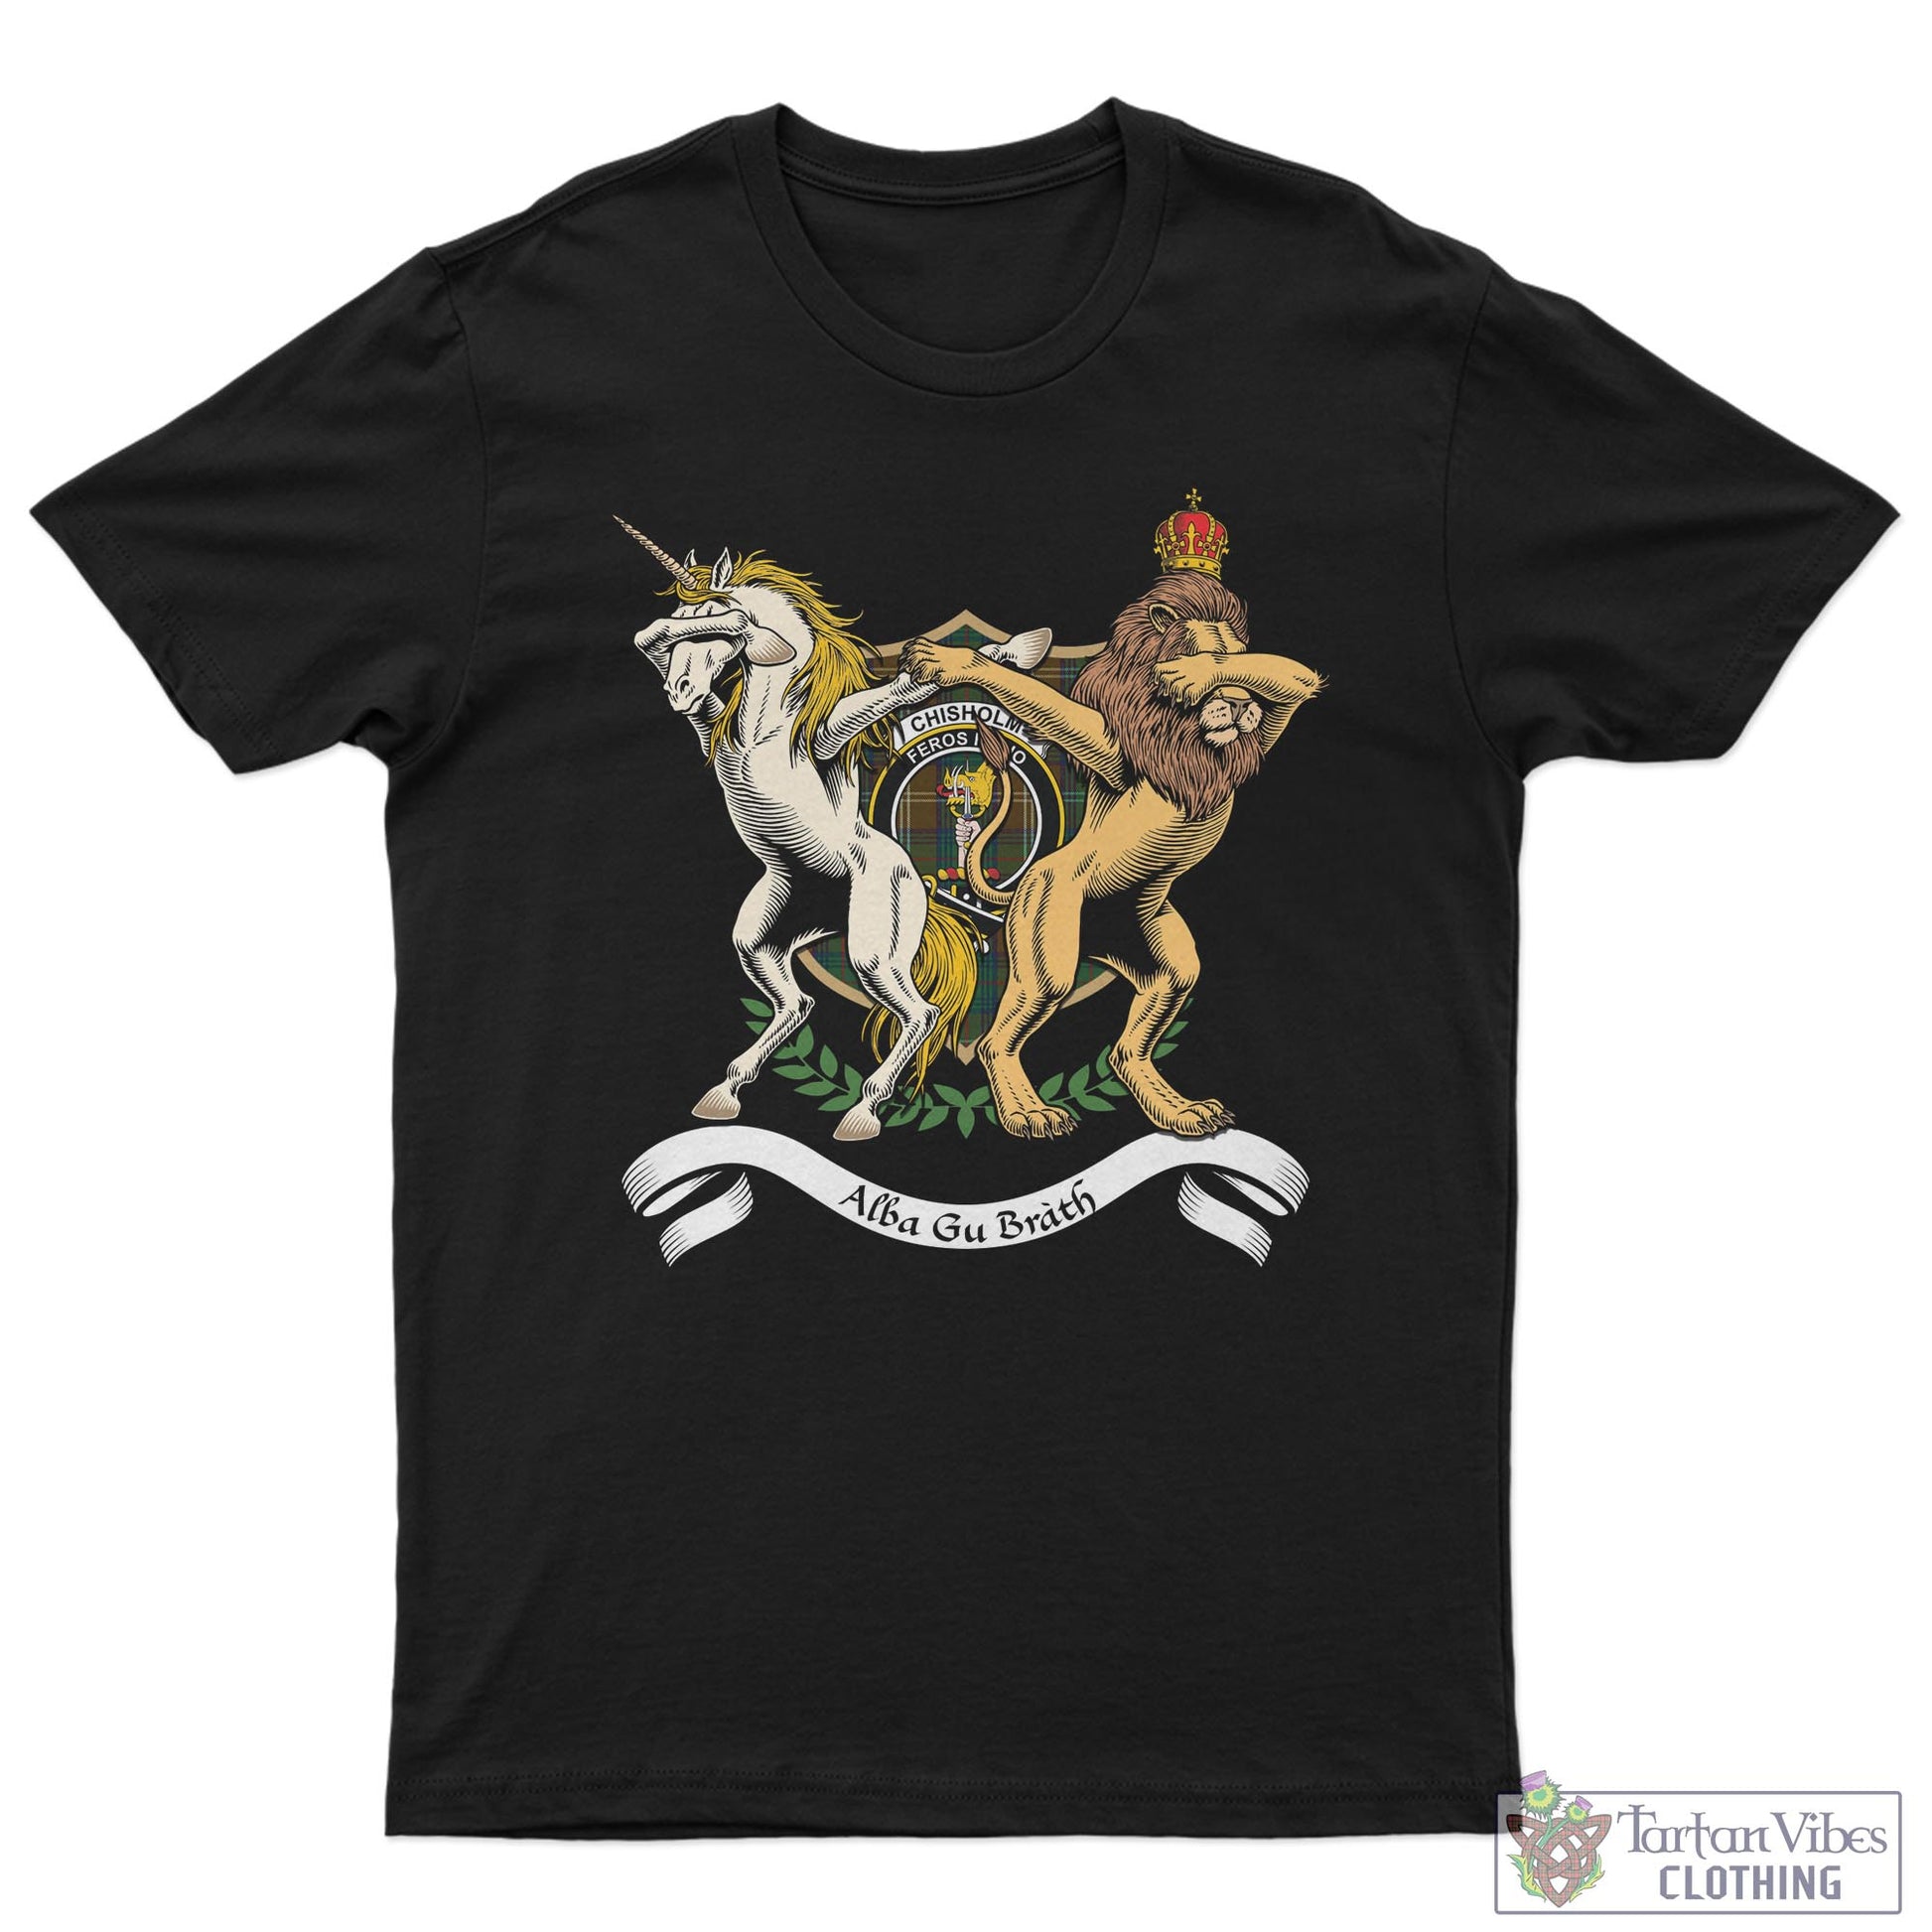 Tartan Vibes Clothing Chisholm Hunting Family Crest Cotton Men's T-Shirt with Scotland Royal Coat Of Arm Funny Style